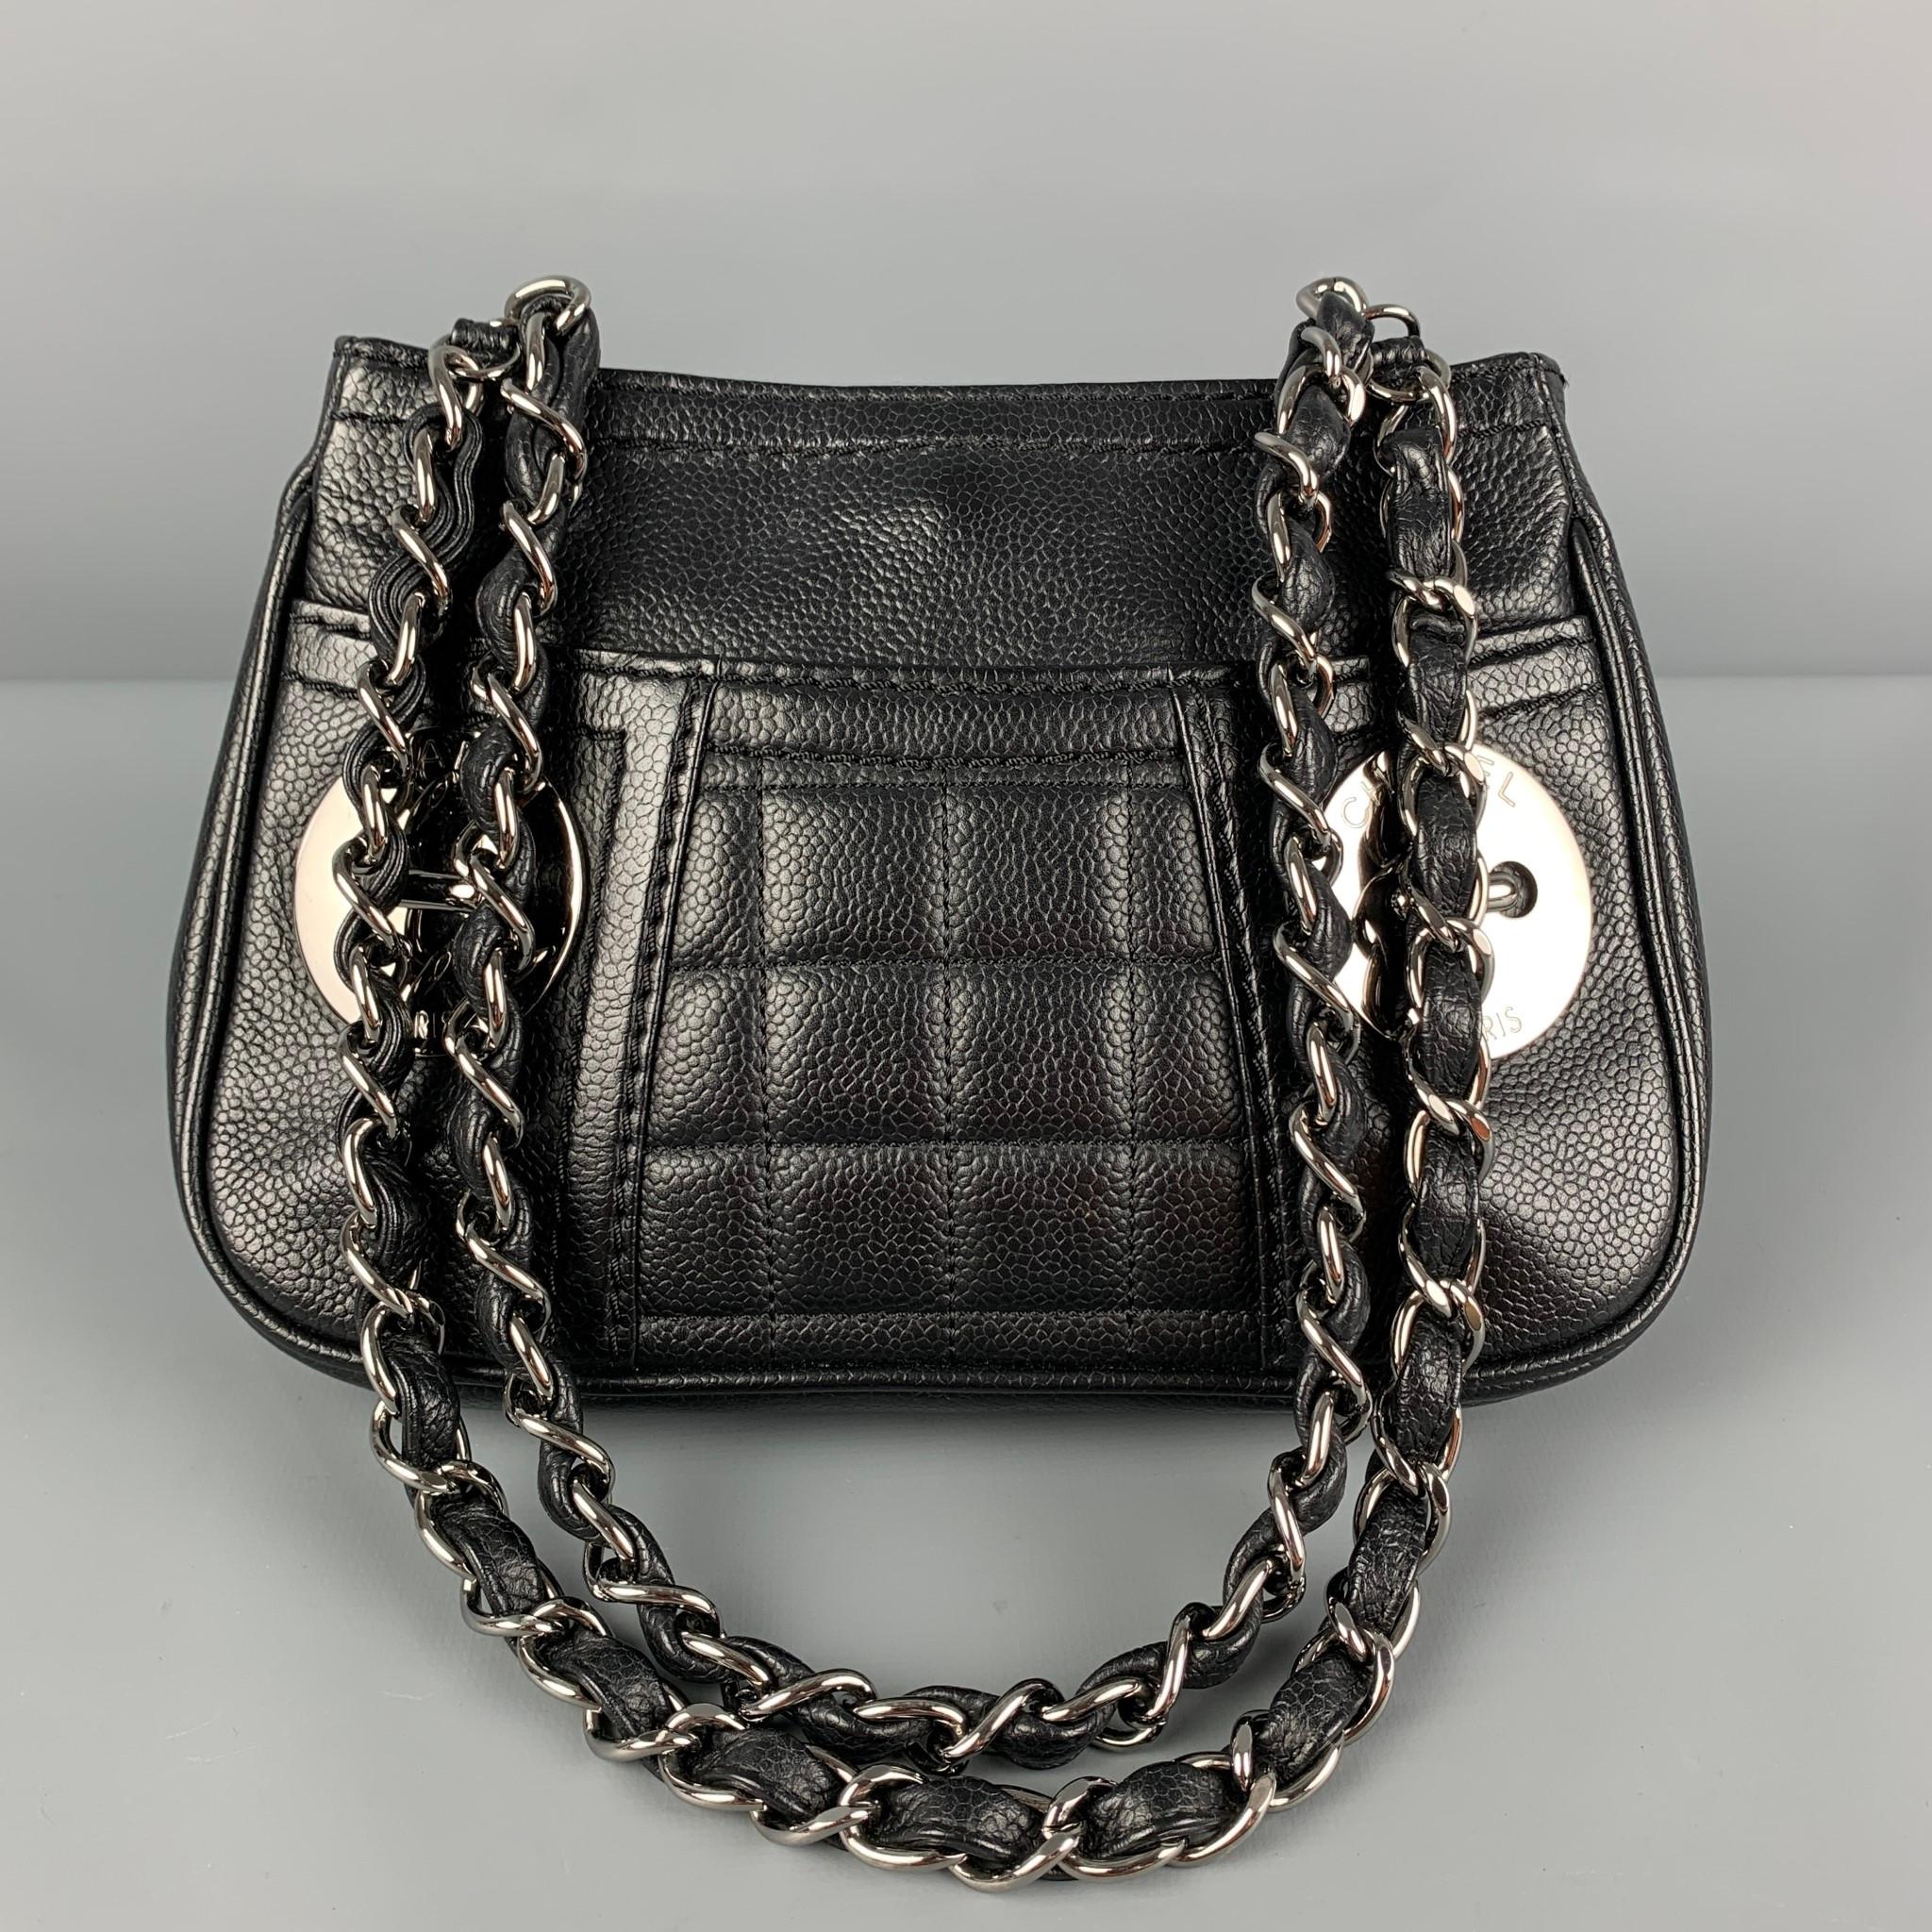 CHANEL handbag comes in a black leather with a red interior featuring signature double chainlink top handles, front silver tone logo details, quilted panel, and a snap button closure. Made in Italy. 

Very Good Pre-Owned Condition.
Marked: